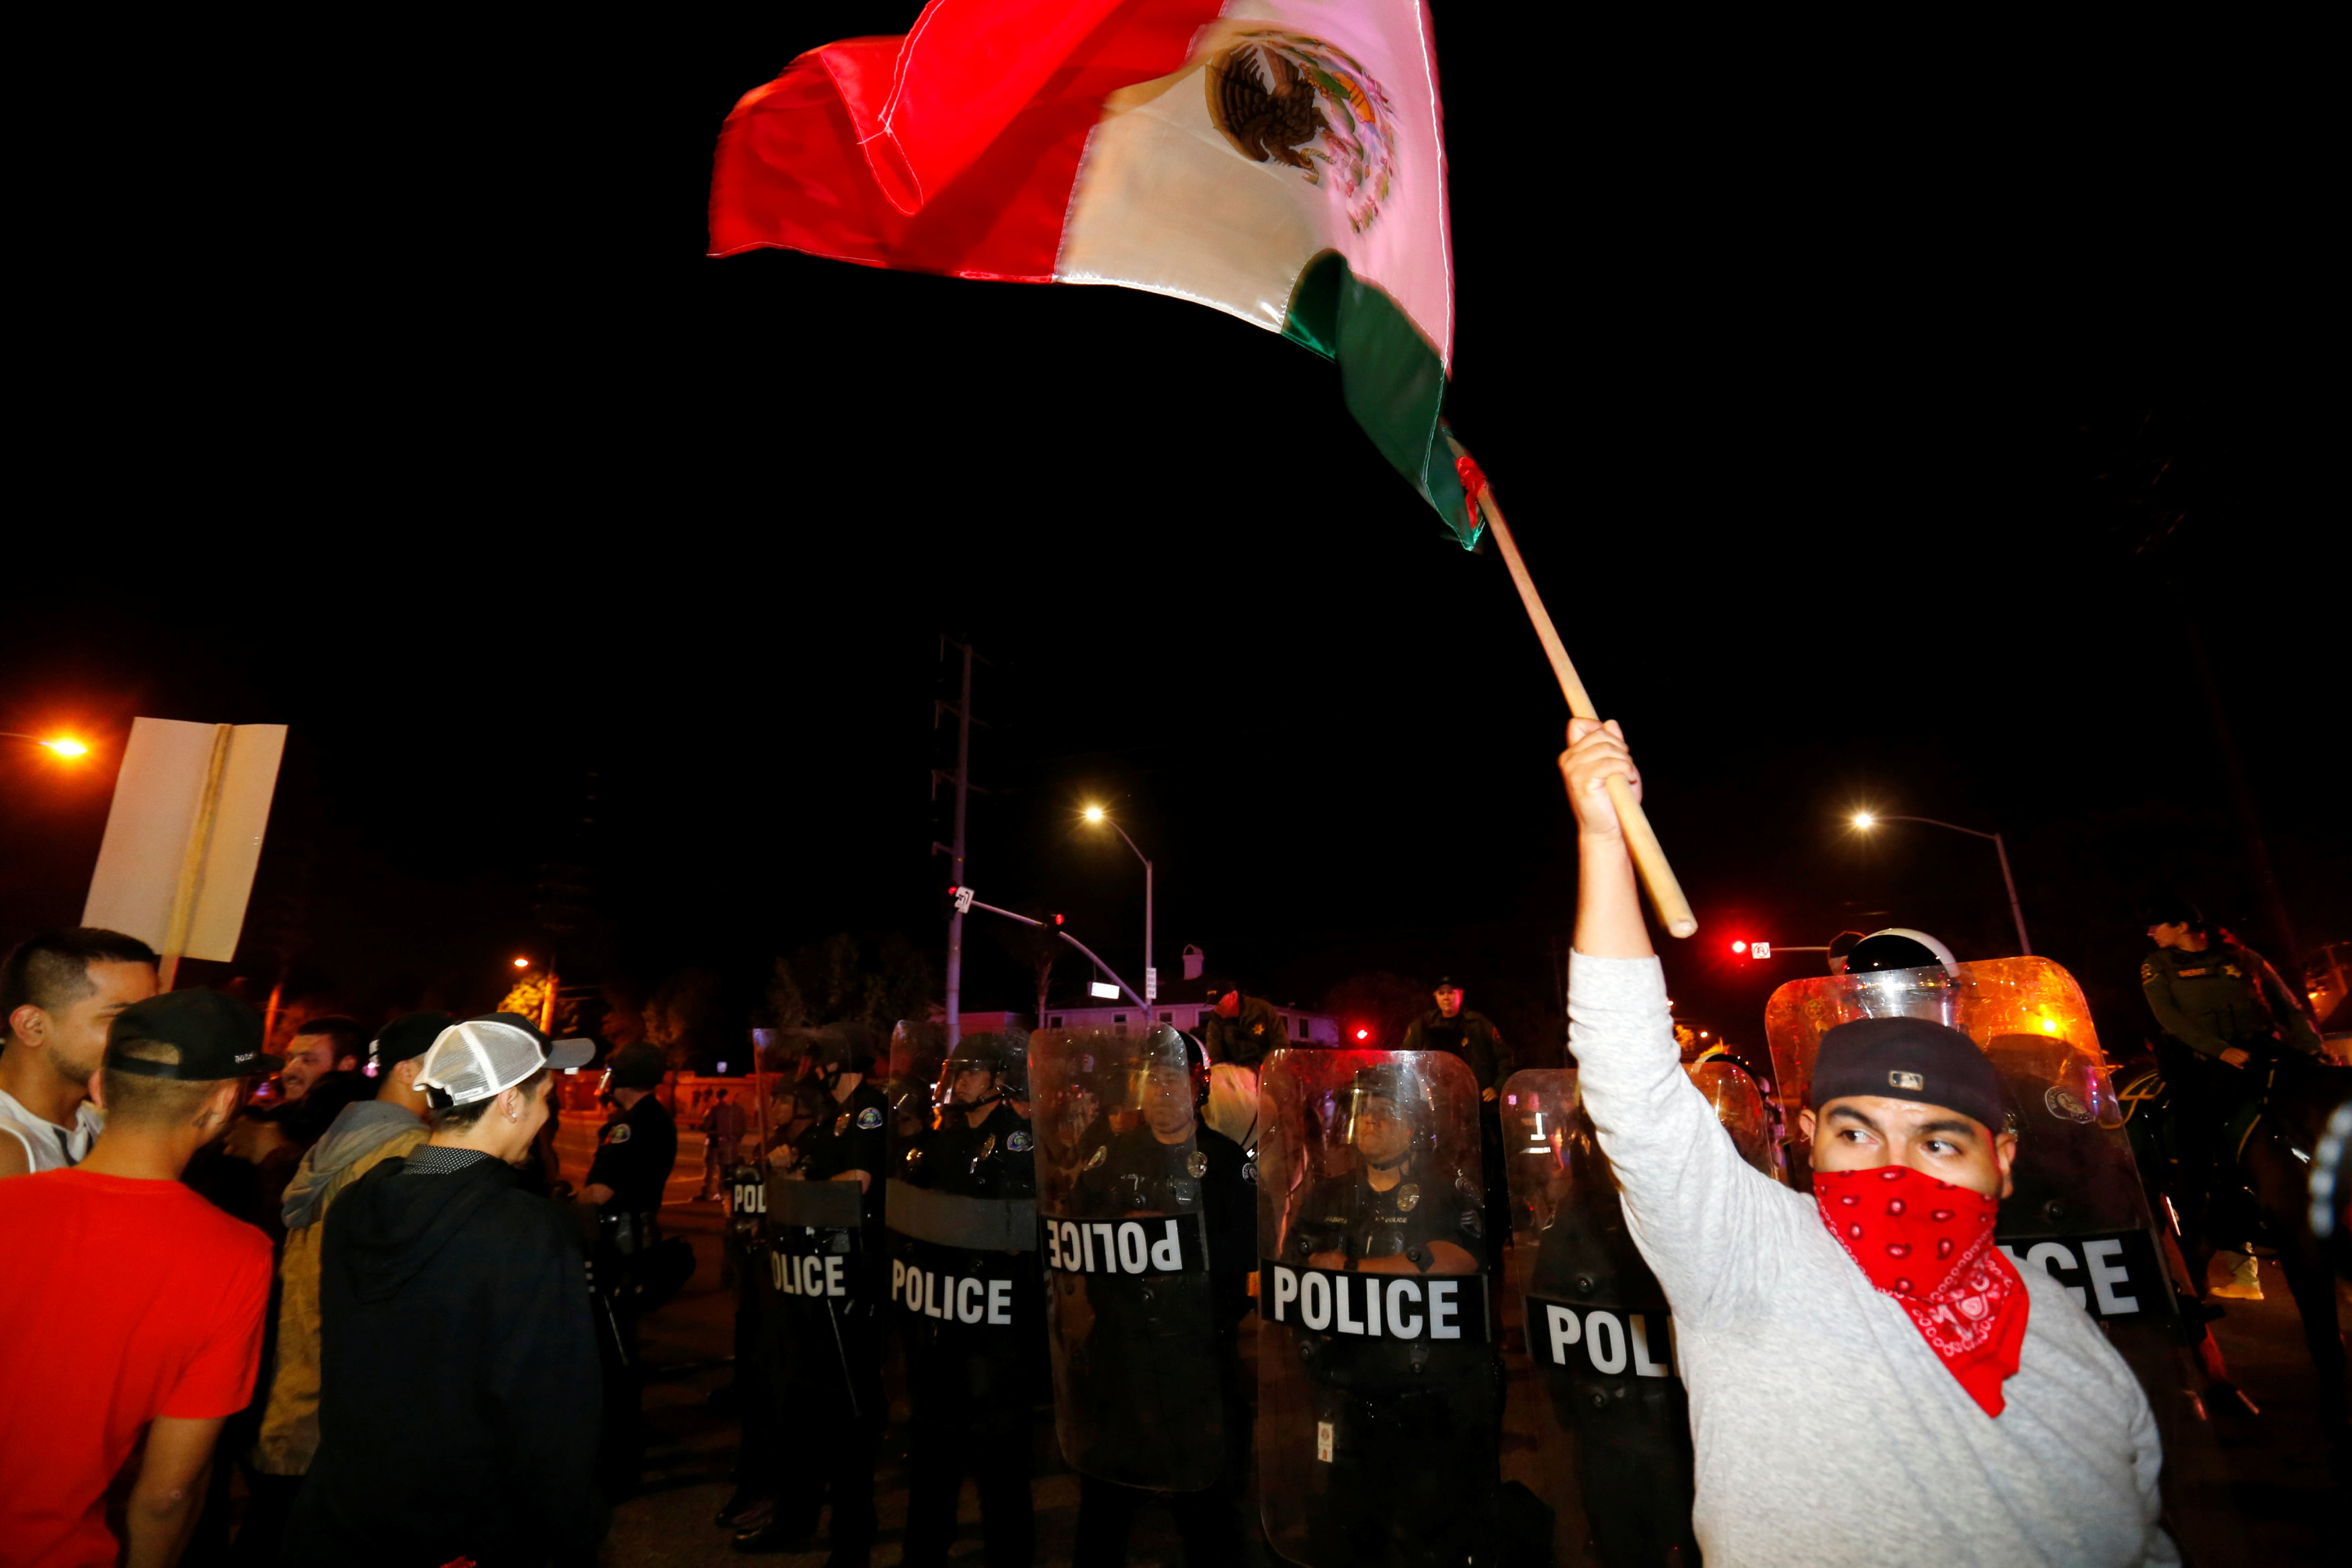 Police in riot gear form a line to begin to break up a group of protesters, one with a Mexican flag, outside Republican U.S. presidential candidate Donald Trump's campaign rally in Costa Mesa, California, April 28, 2016.